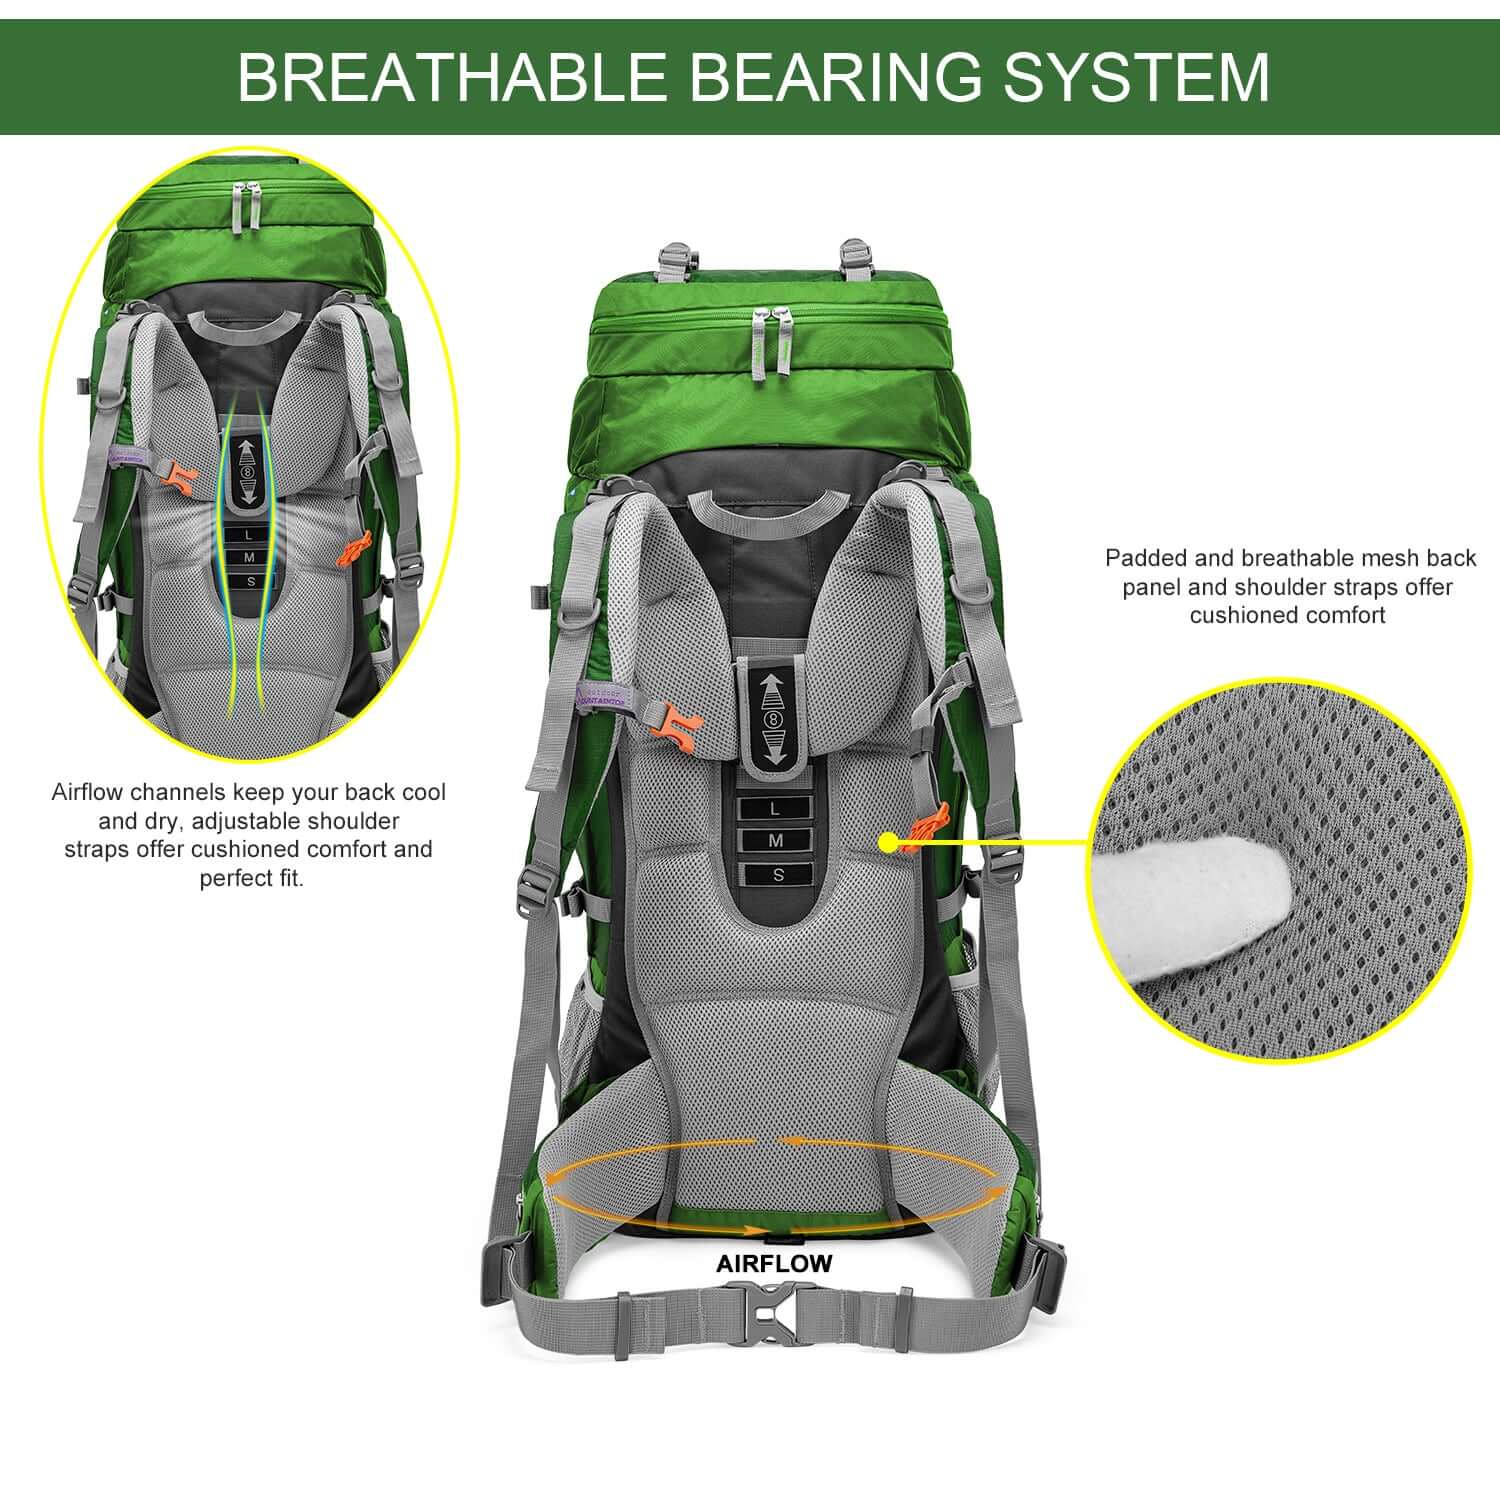 Breathable bearing system,Functional backpack 80L